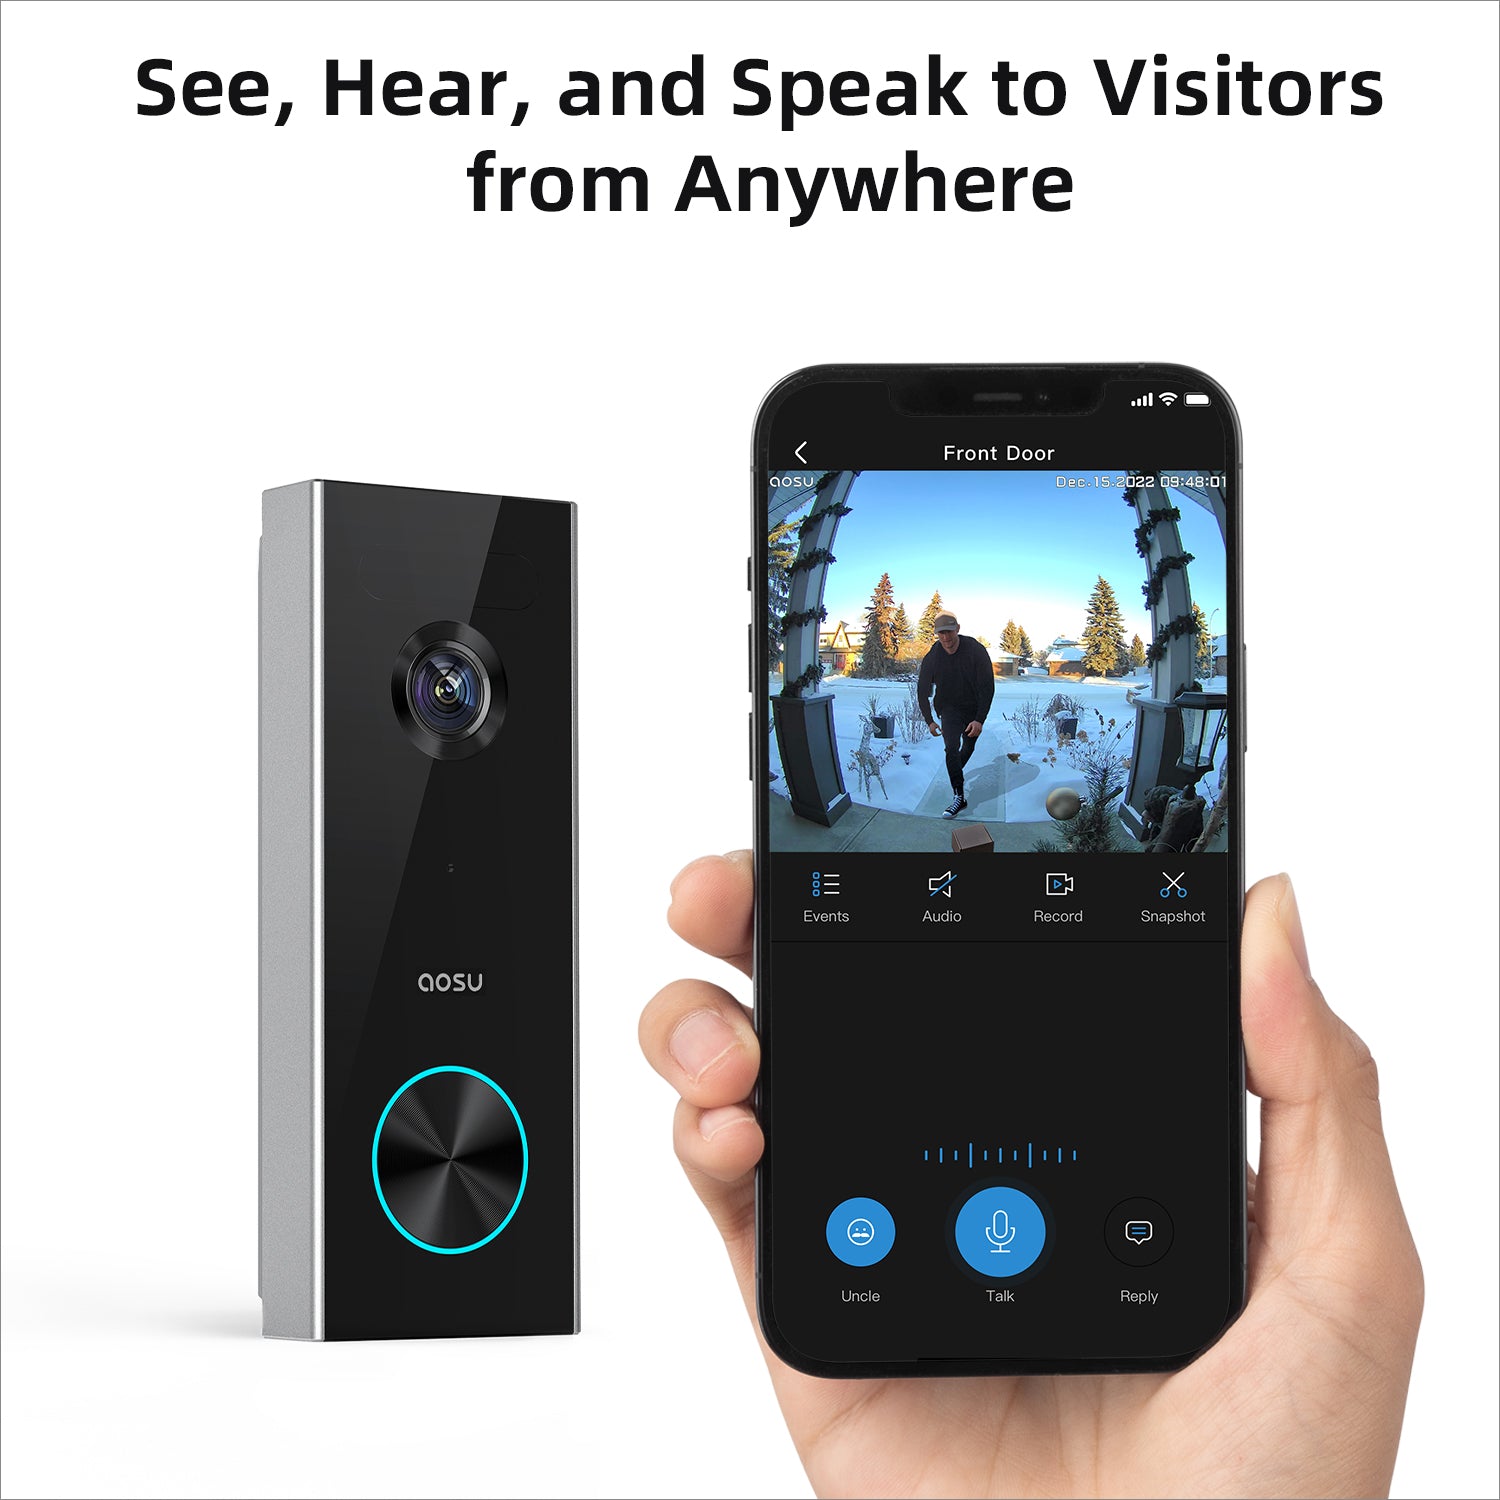 See, Hear, and Speak to Visitors from Anywhere